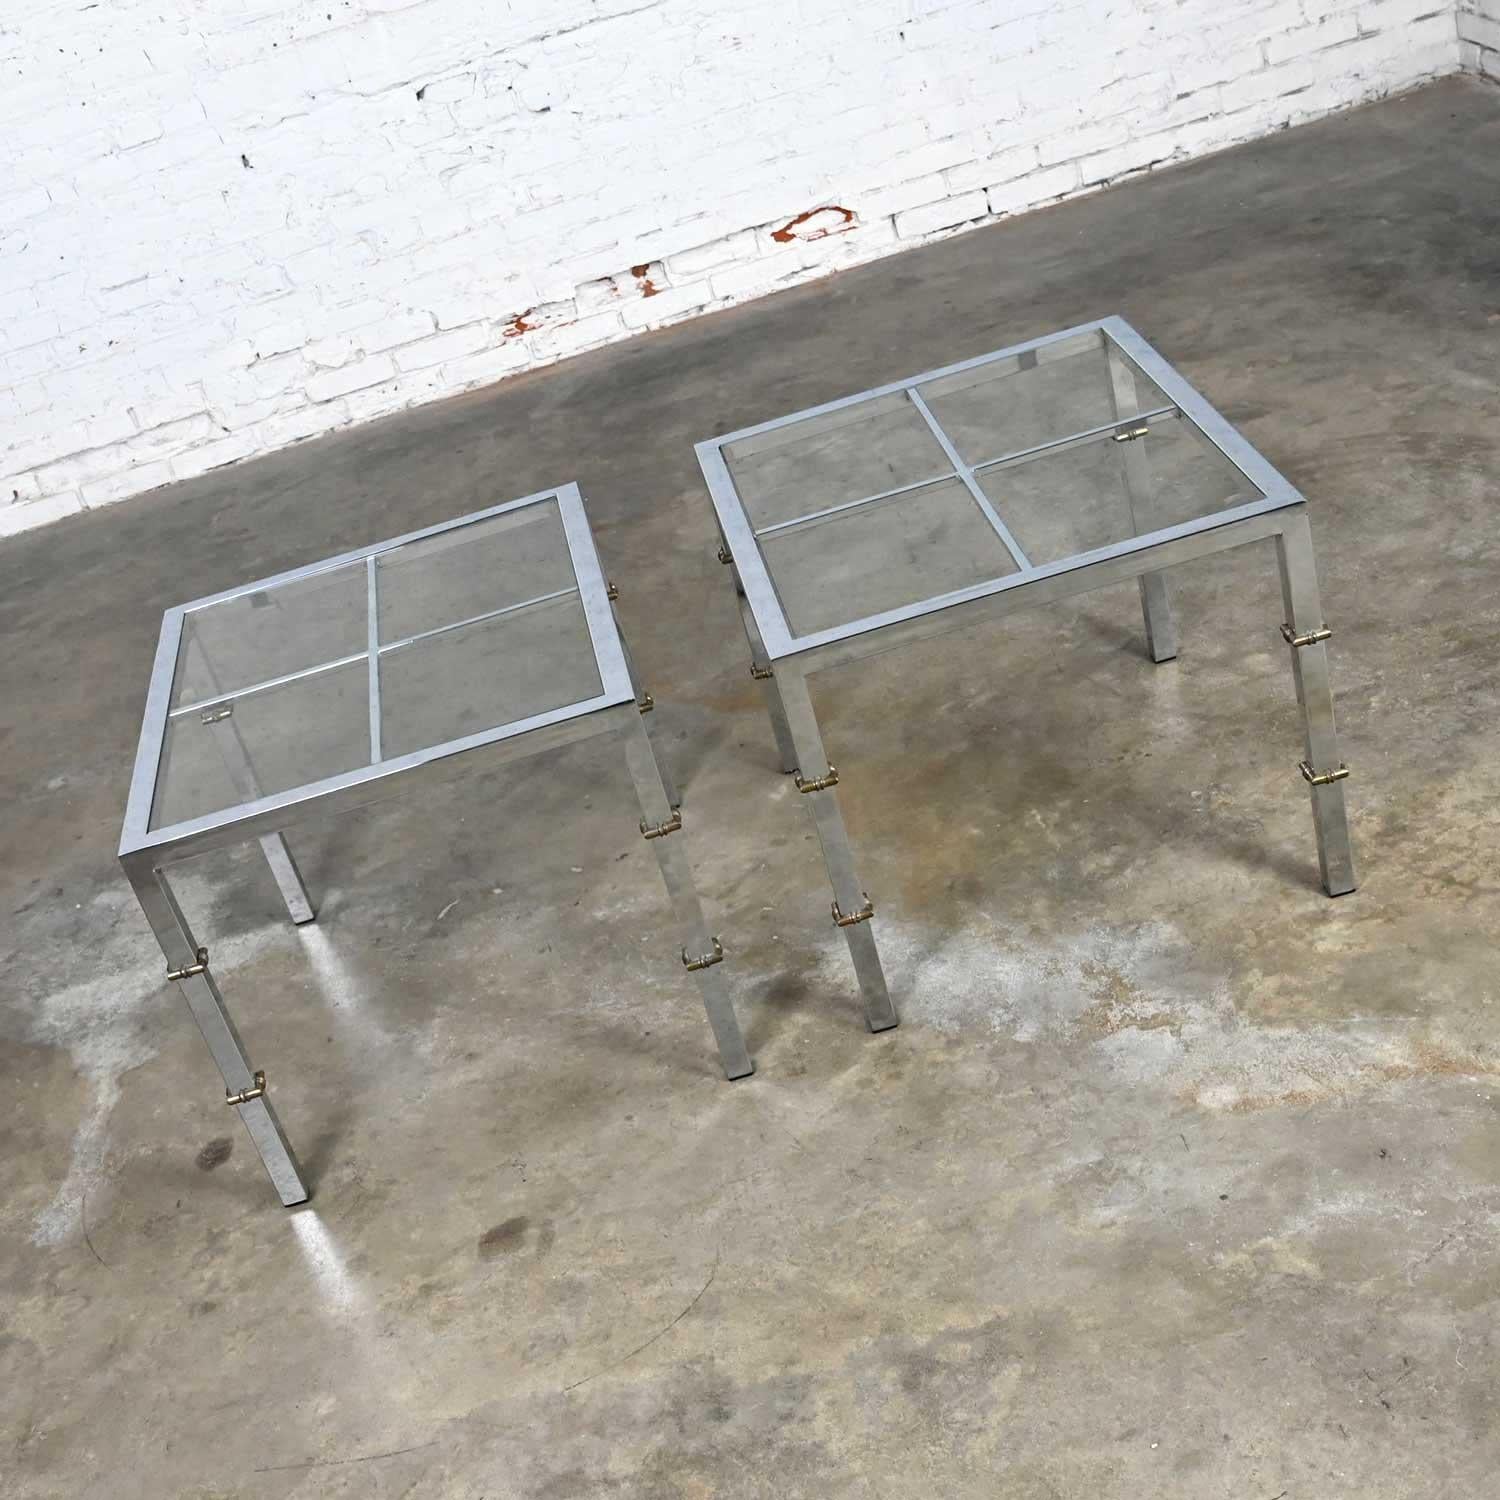 Hollywood Regency Chrome & Glass Square End Tables Brass Details a Pair For Sale 5